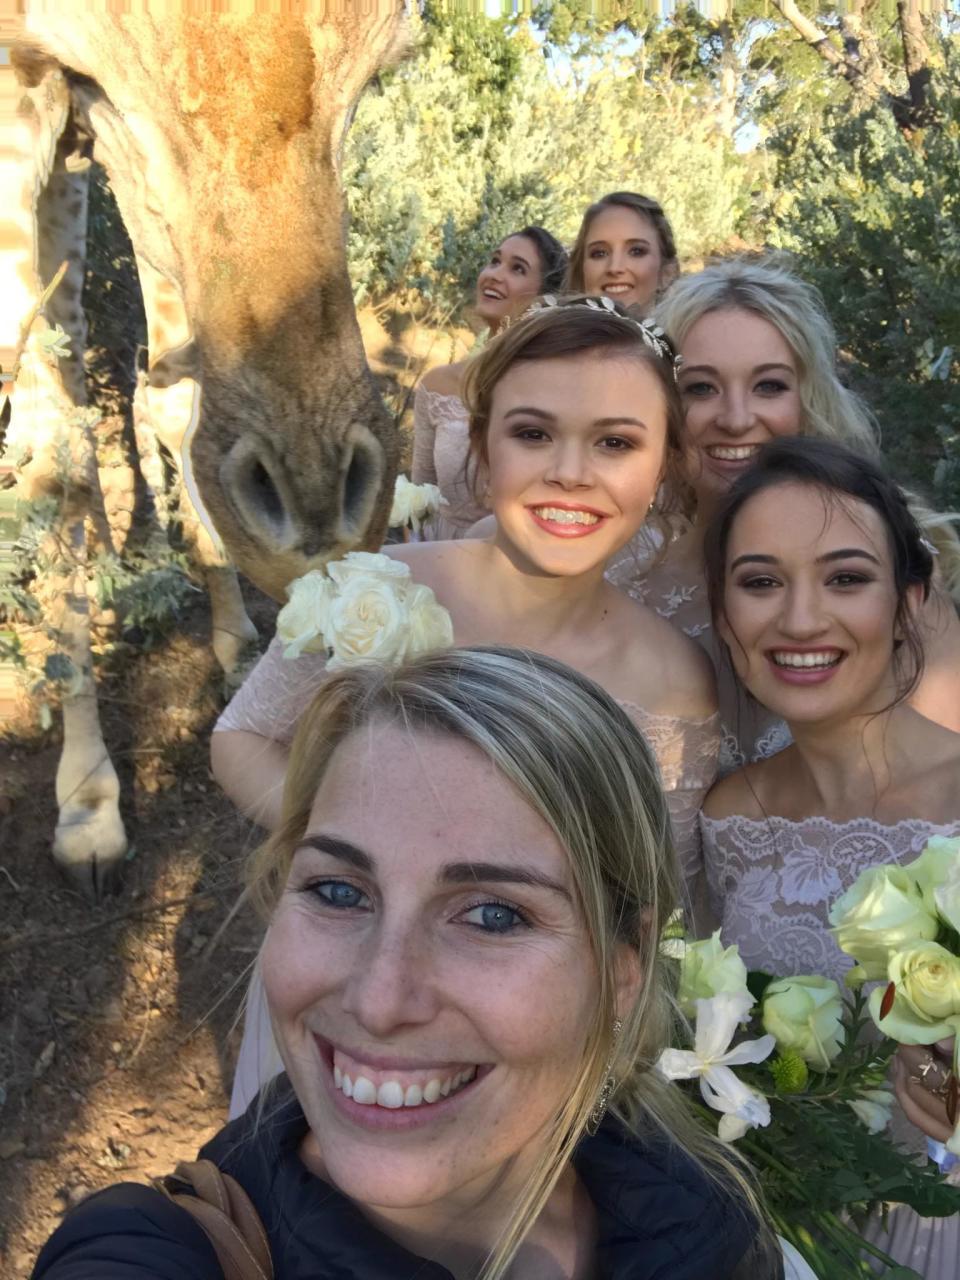 Photographer&nbsp;Stephanie Norman snaps a selfie with Abby and the bridesmaids. (Photo: <a href="https://www.instagram.com/stephanienormanphotography/" target="_blank">Stephanie Norman Photography</a>)